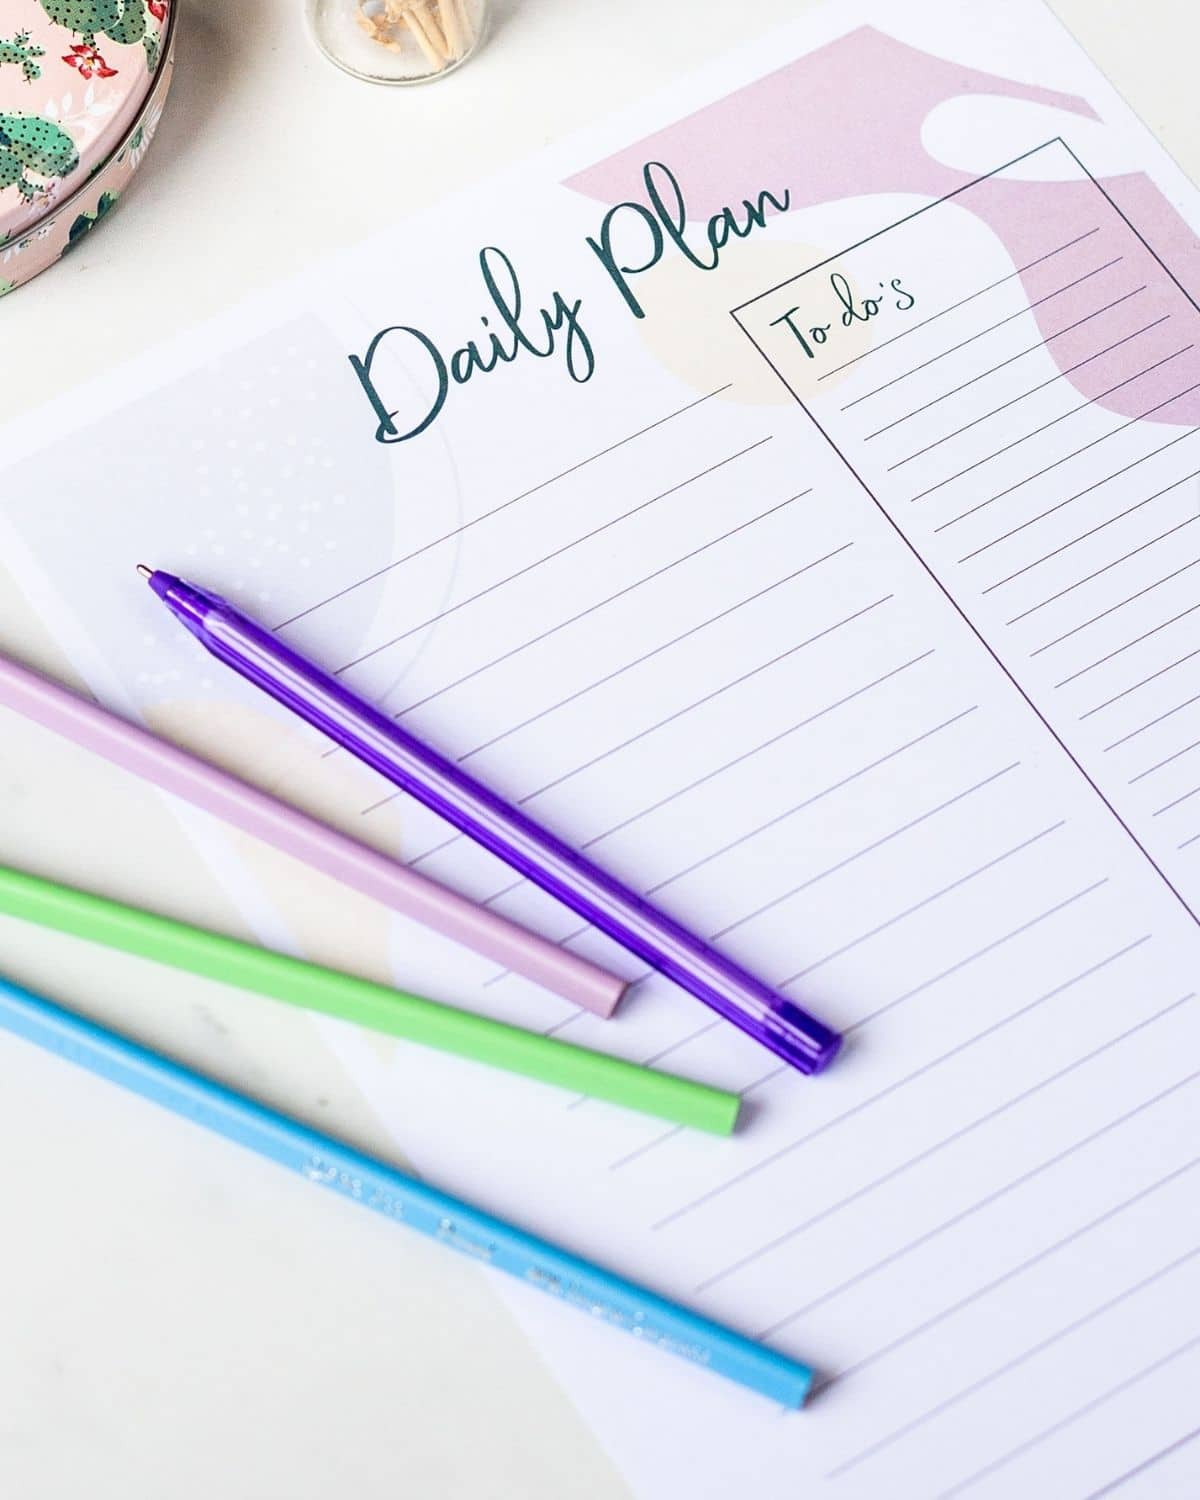 Planning Tips to Plan Your Day